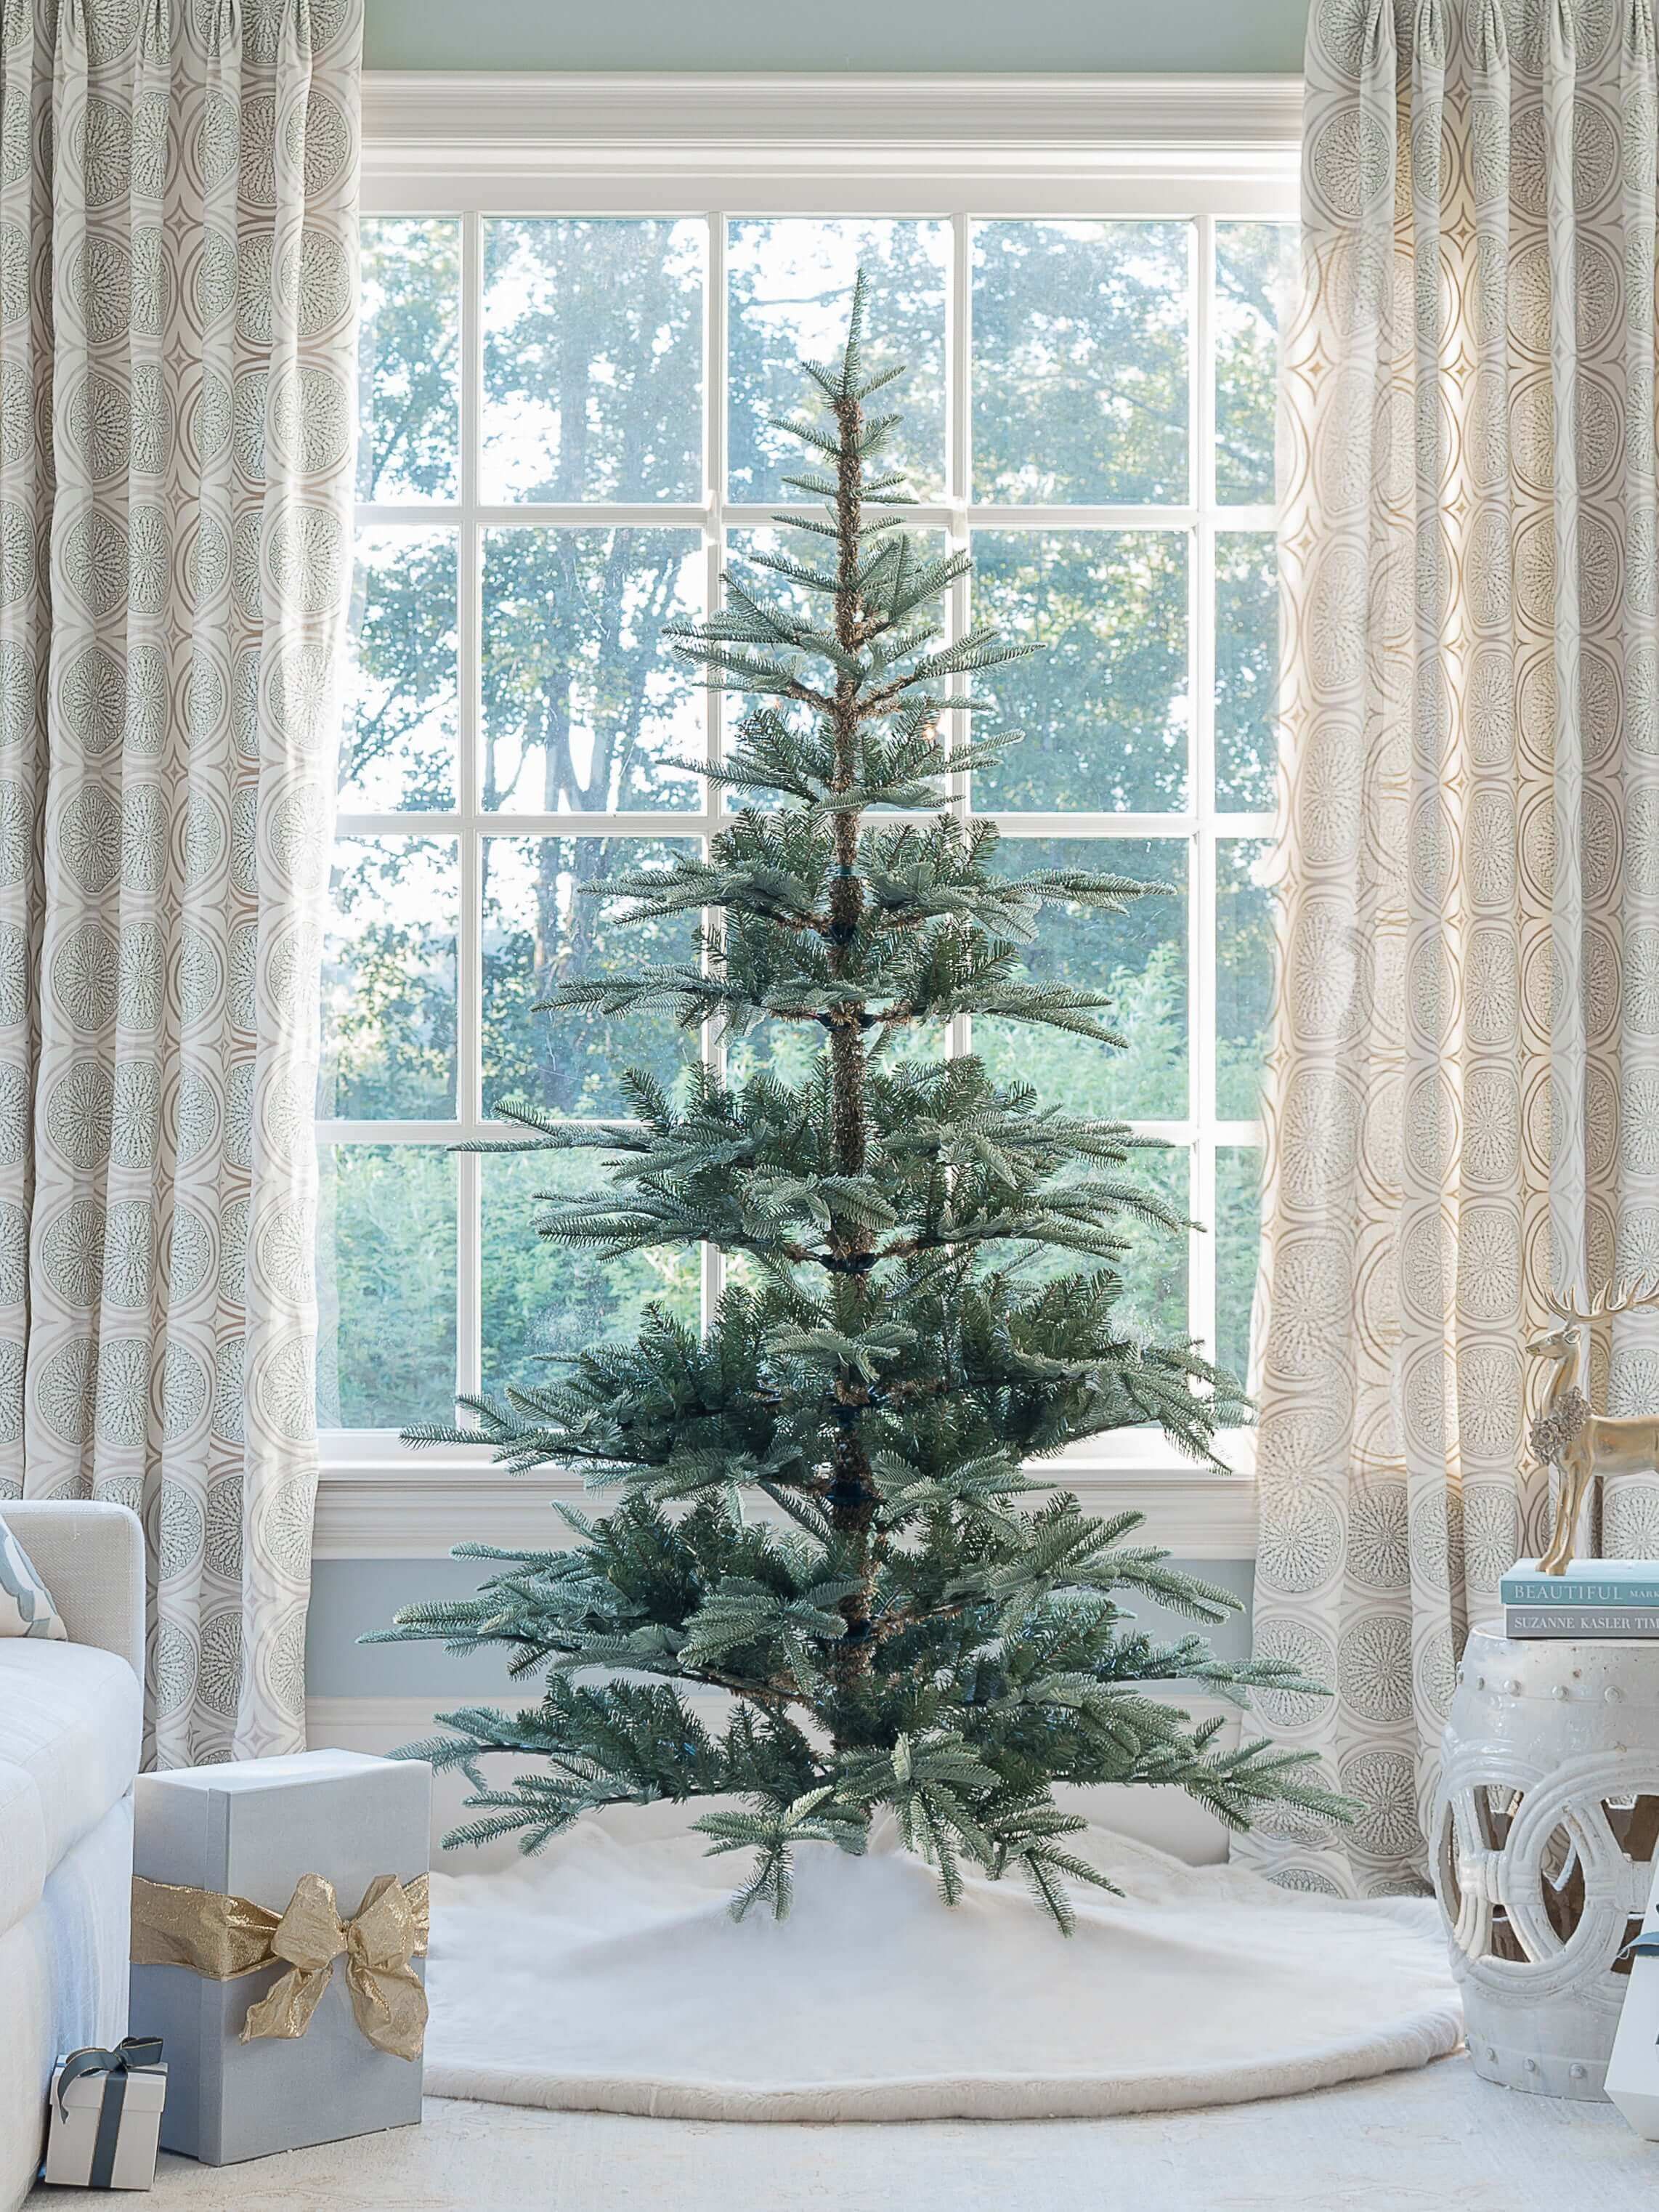 6 Foot King Noble Fir Artificial Christmas Tree Unlit | King of Christmas